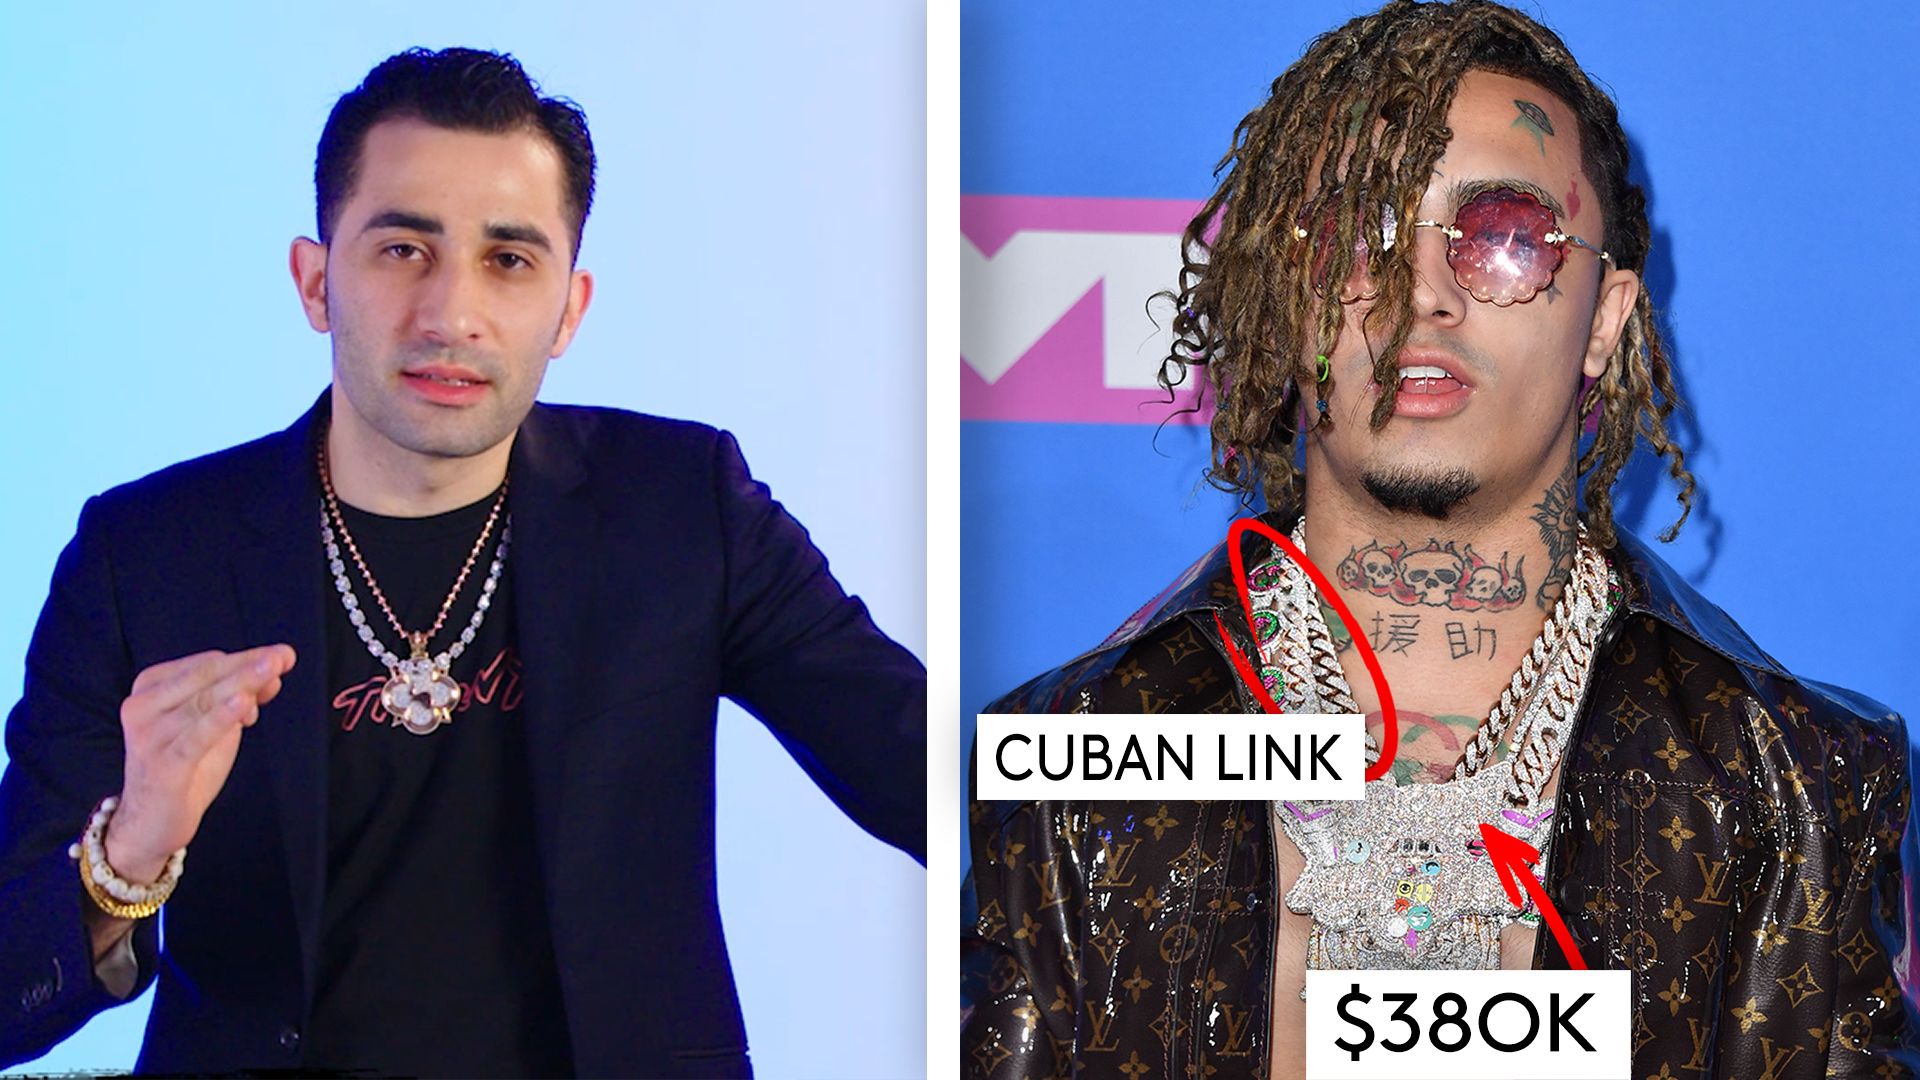 Where Do Rappers Buy Their Chains